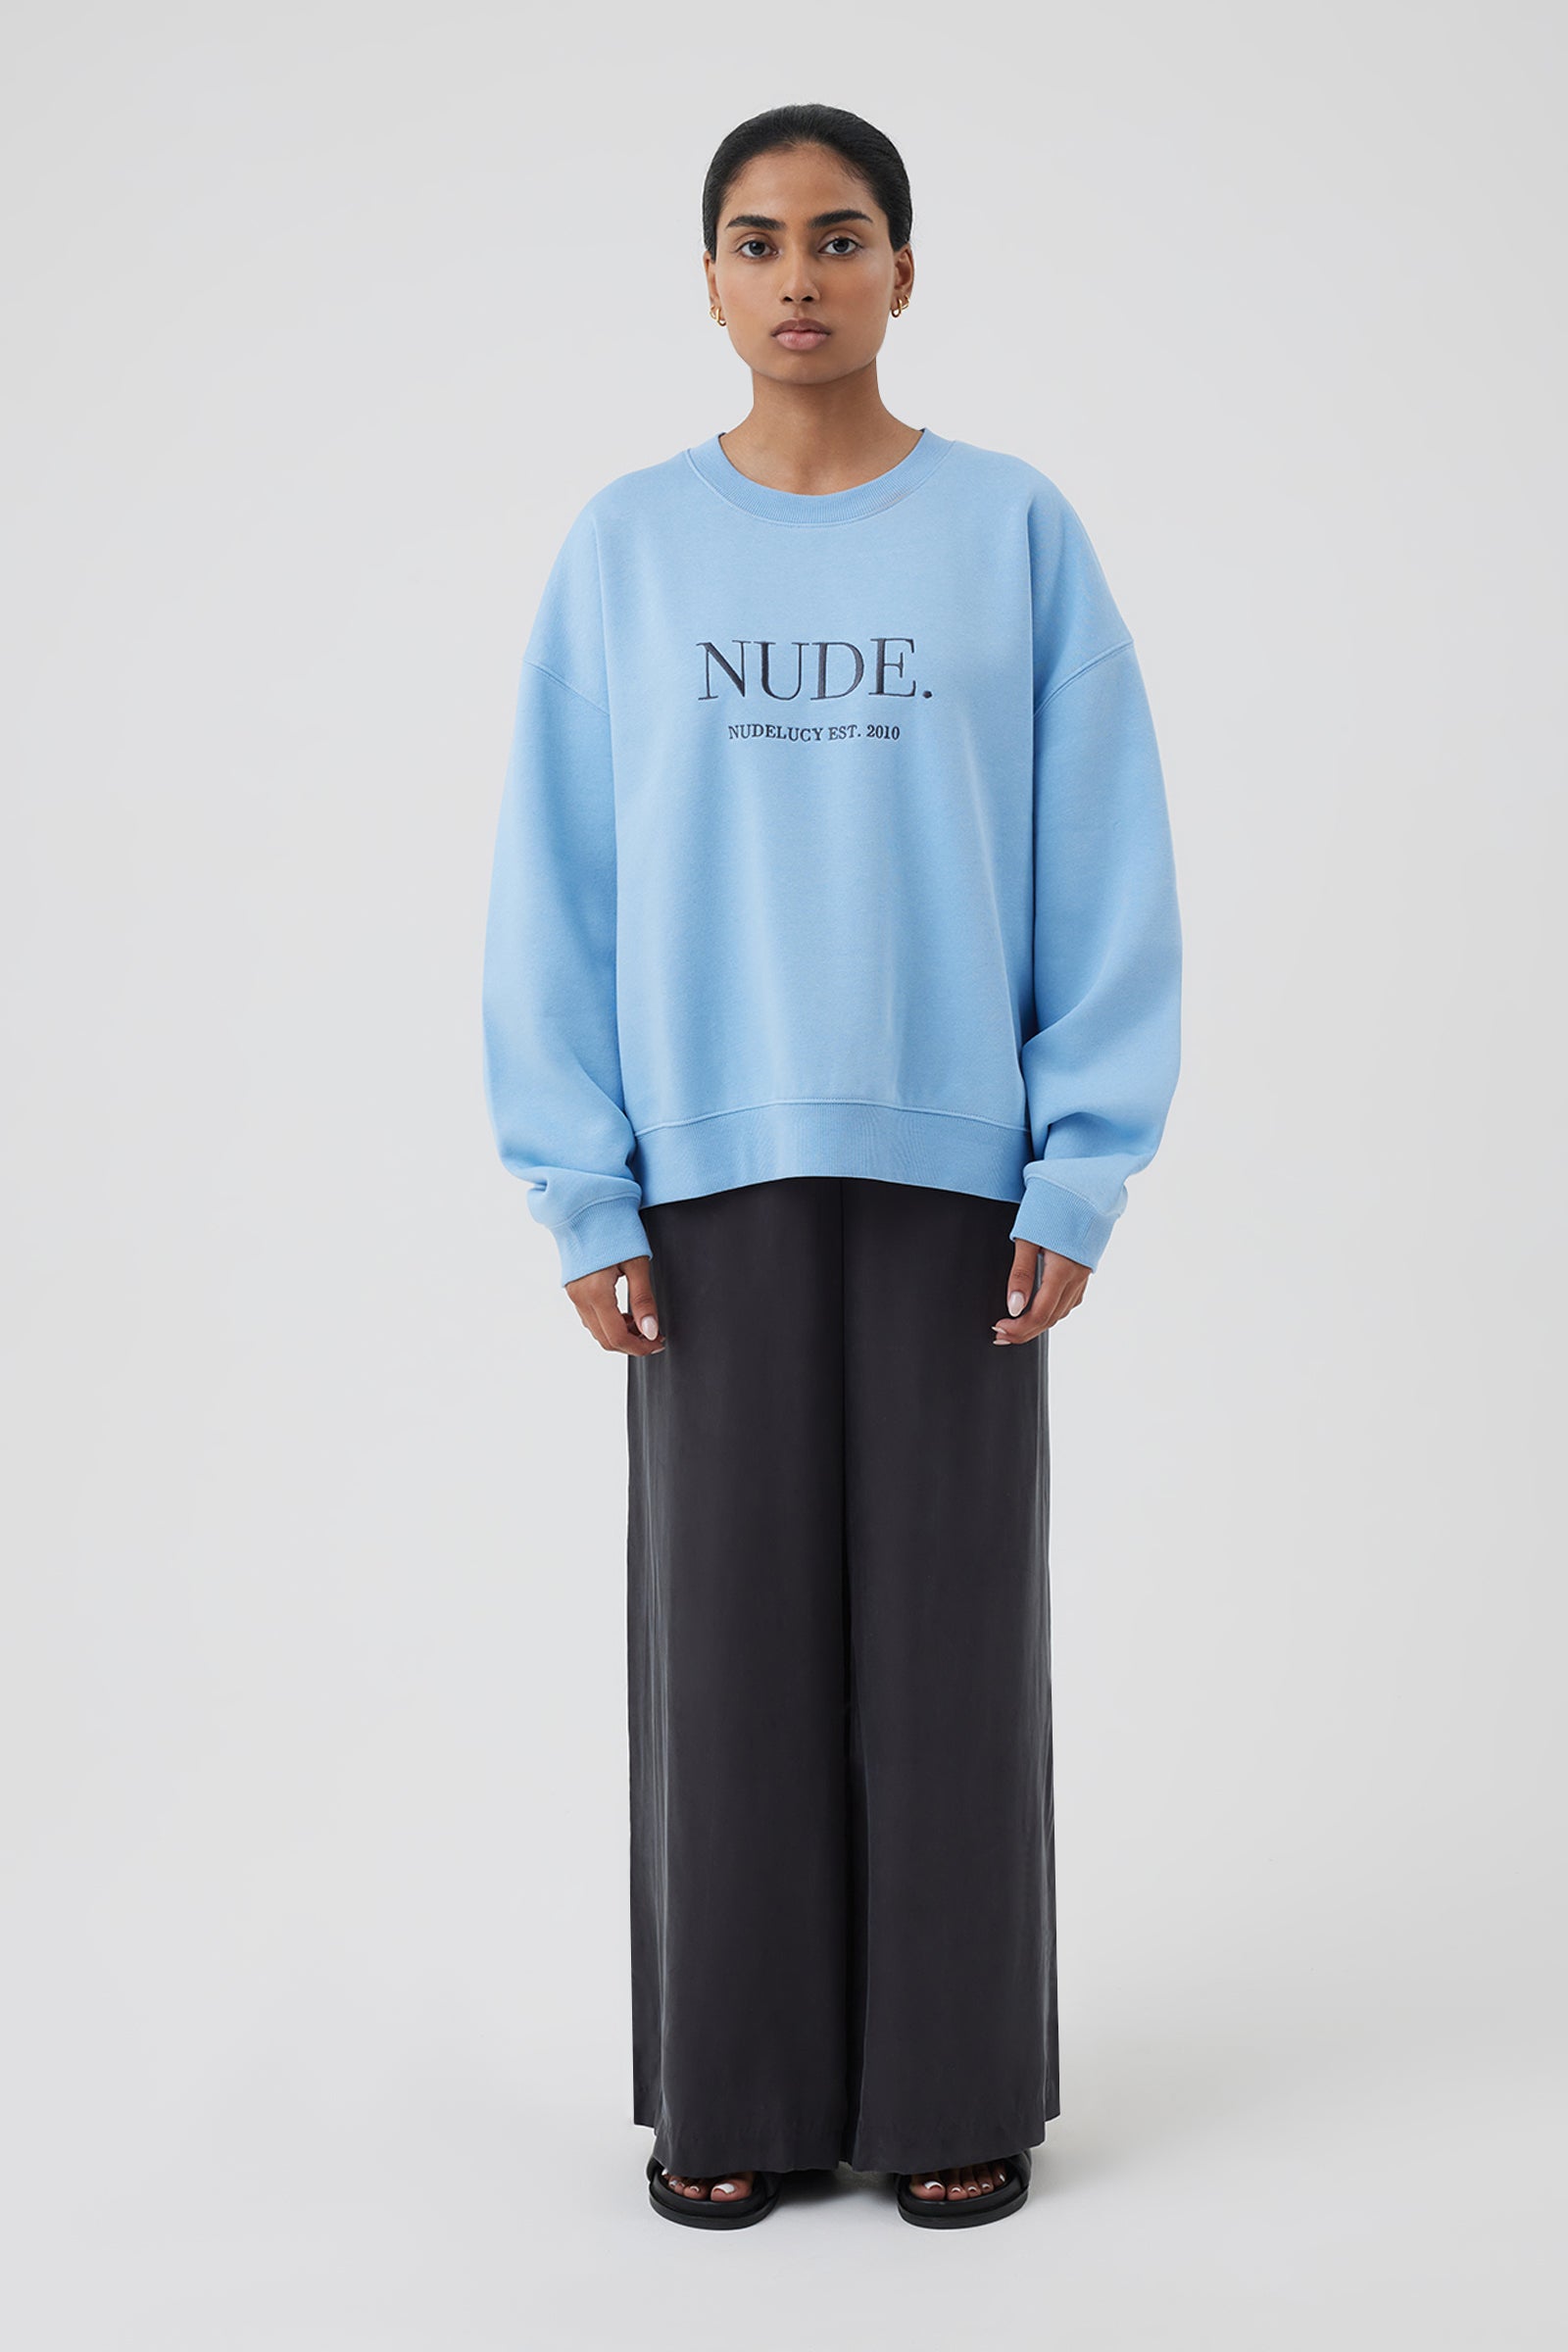 Nude Lucy Nude Sweat In a Blue Horizon Colour